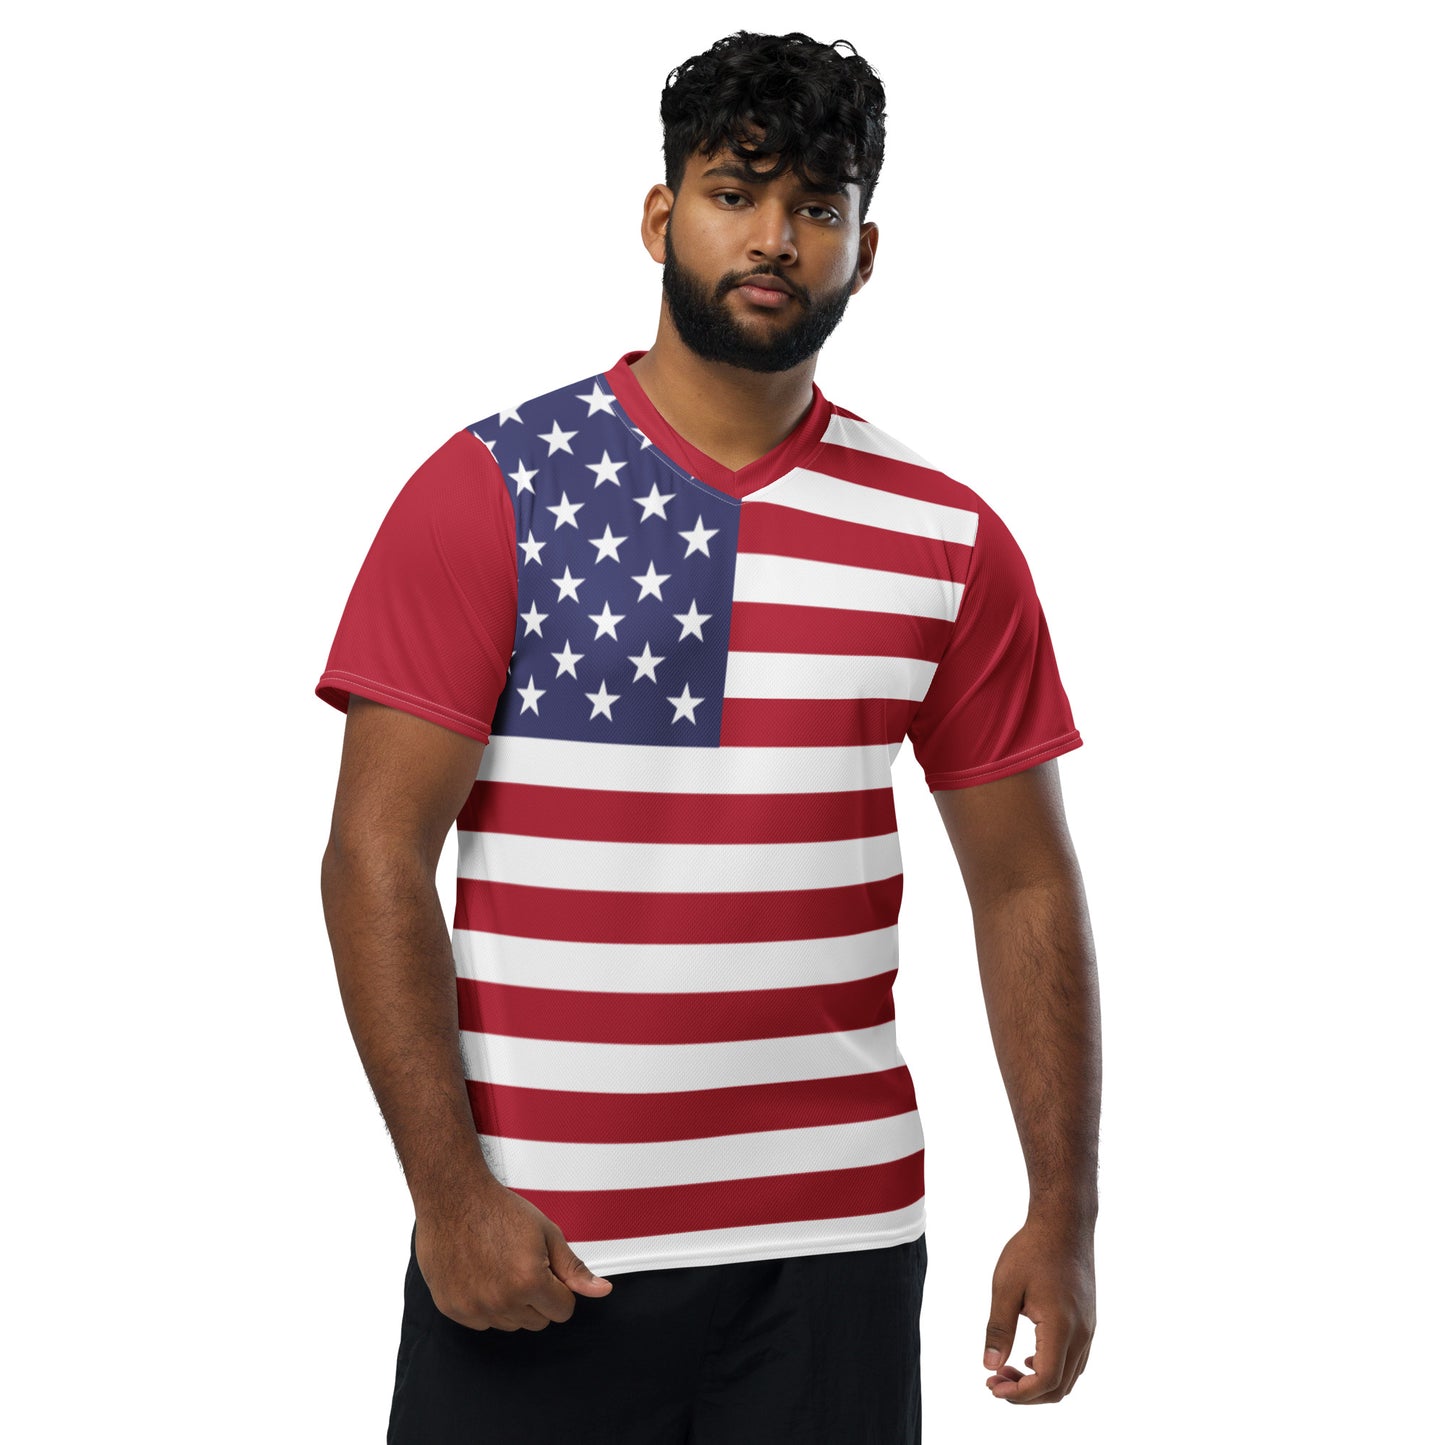 USA Flag Recycled Polyester Unisex Sports Jersey Sizes 2XS - 6XL